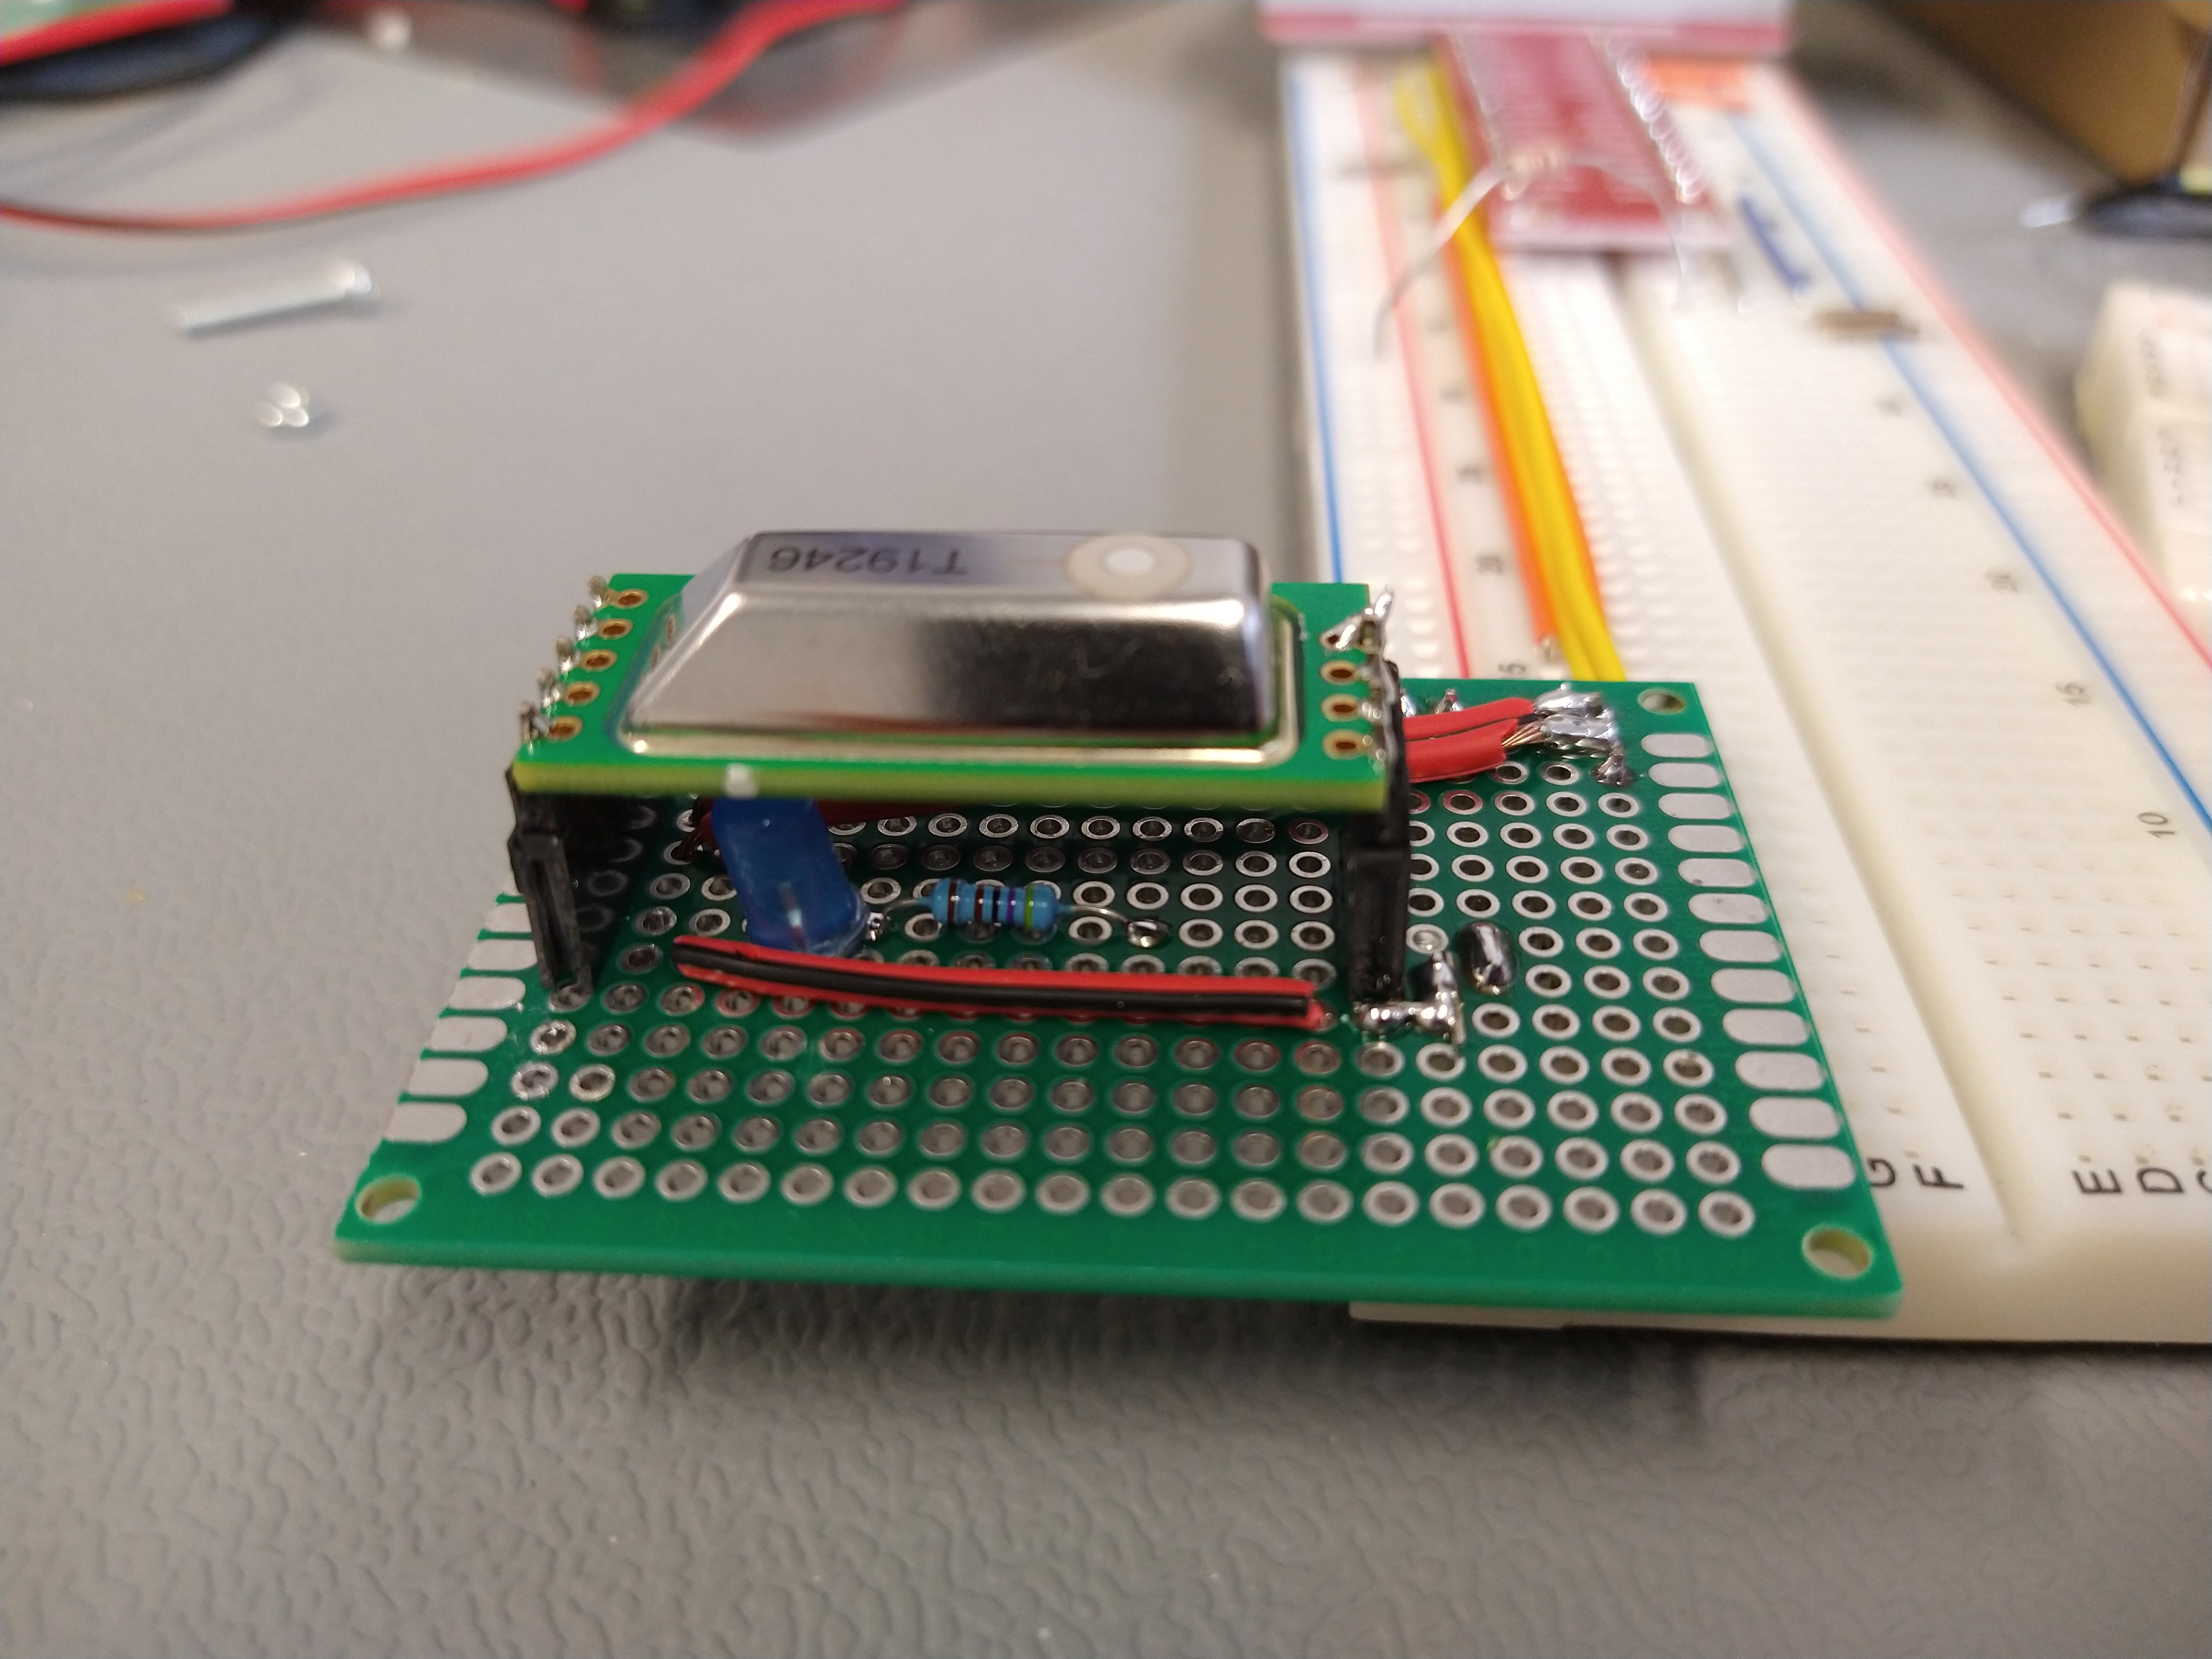 CO2-Sensor breakout board for internal testing with status LED when a measurement is happening